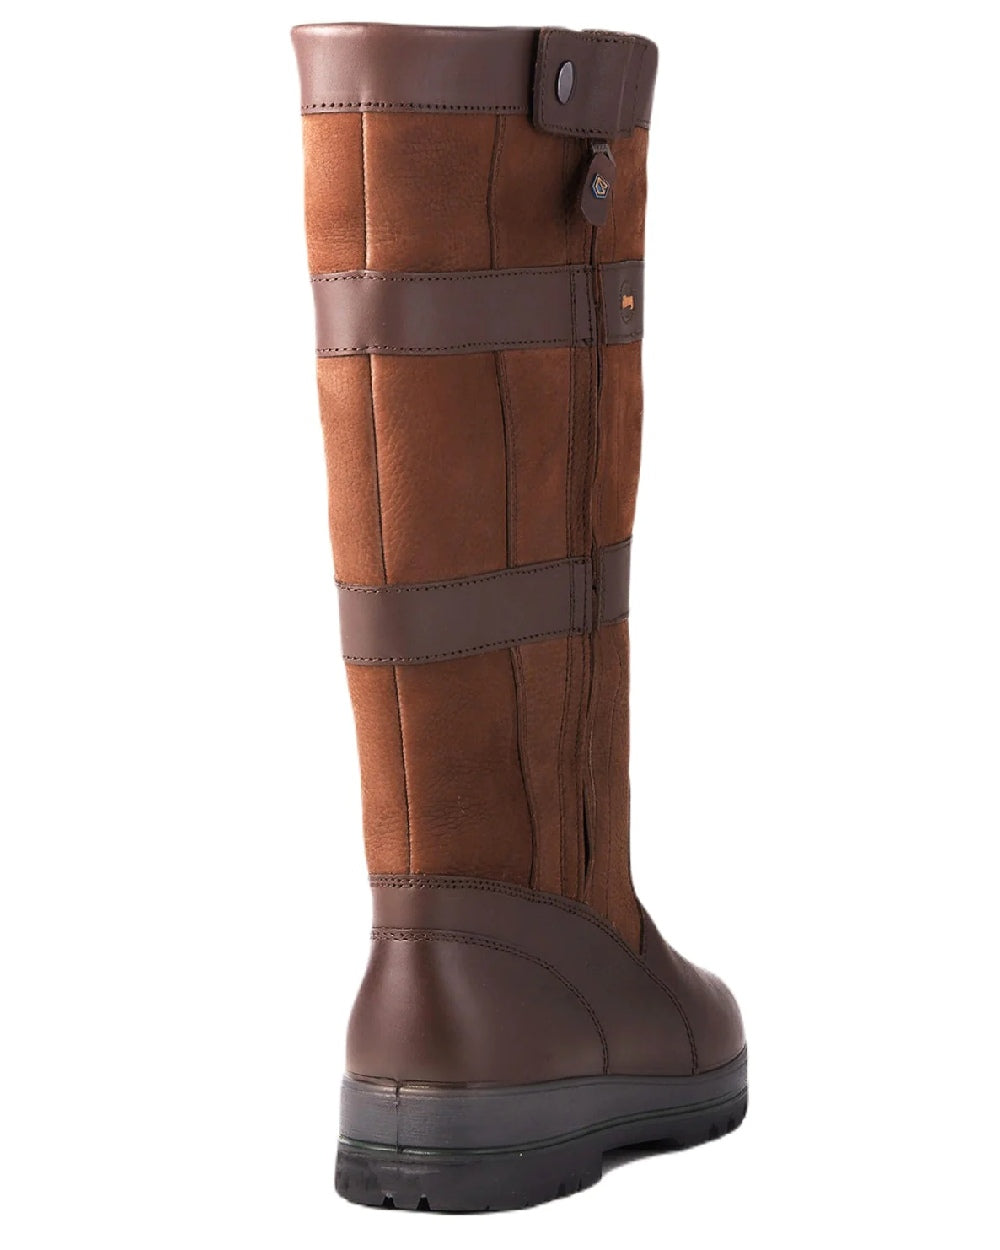 Dubarry Wexford Country Boots in Walnut